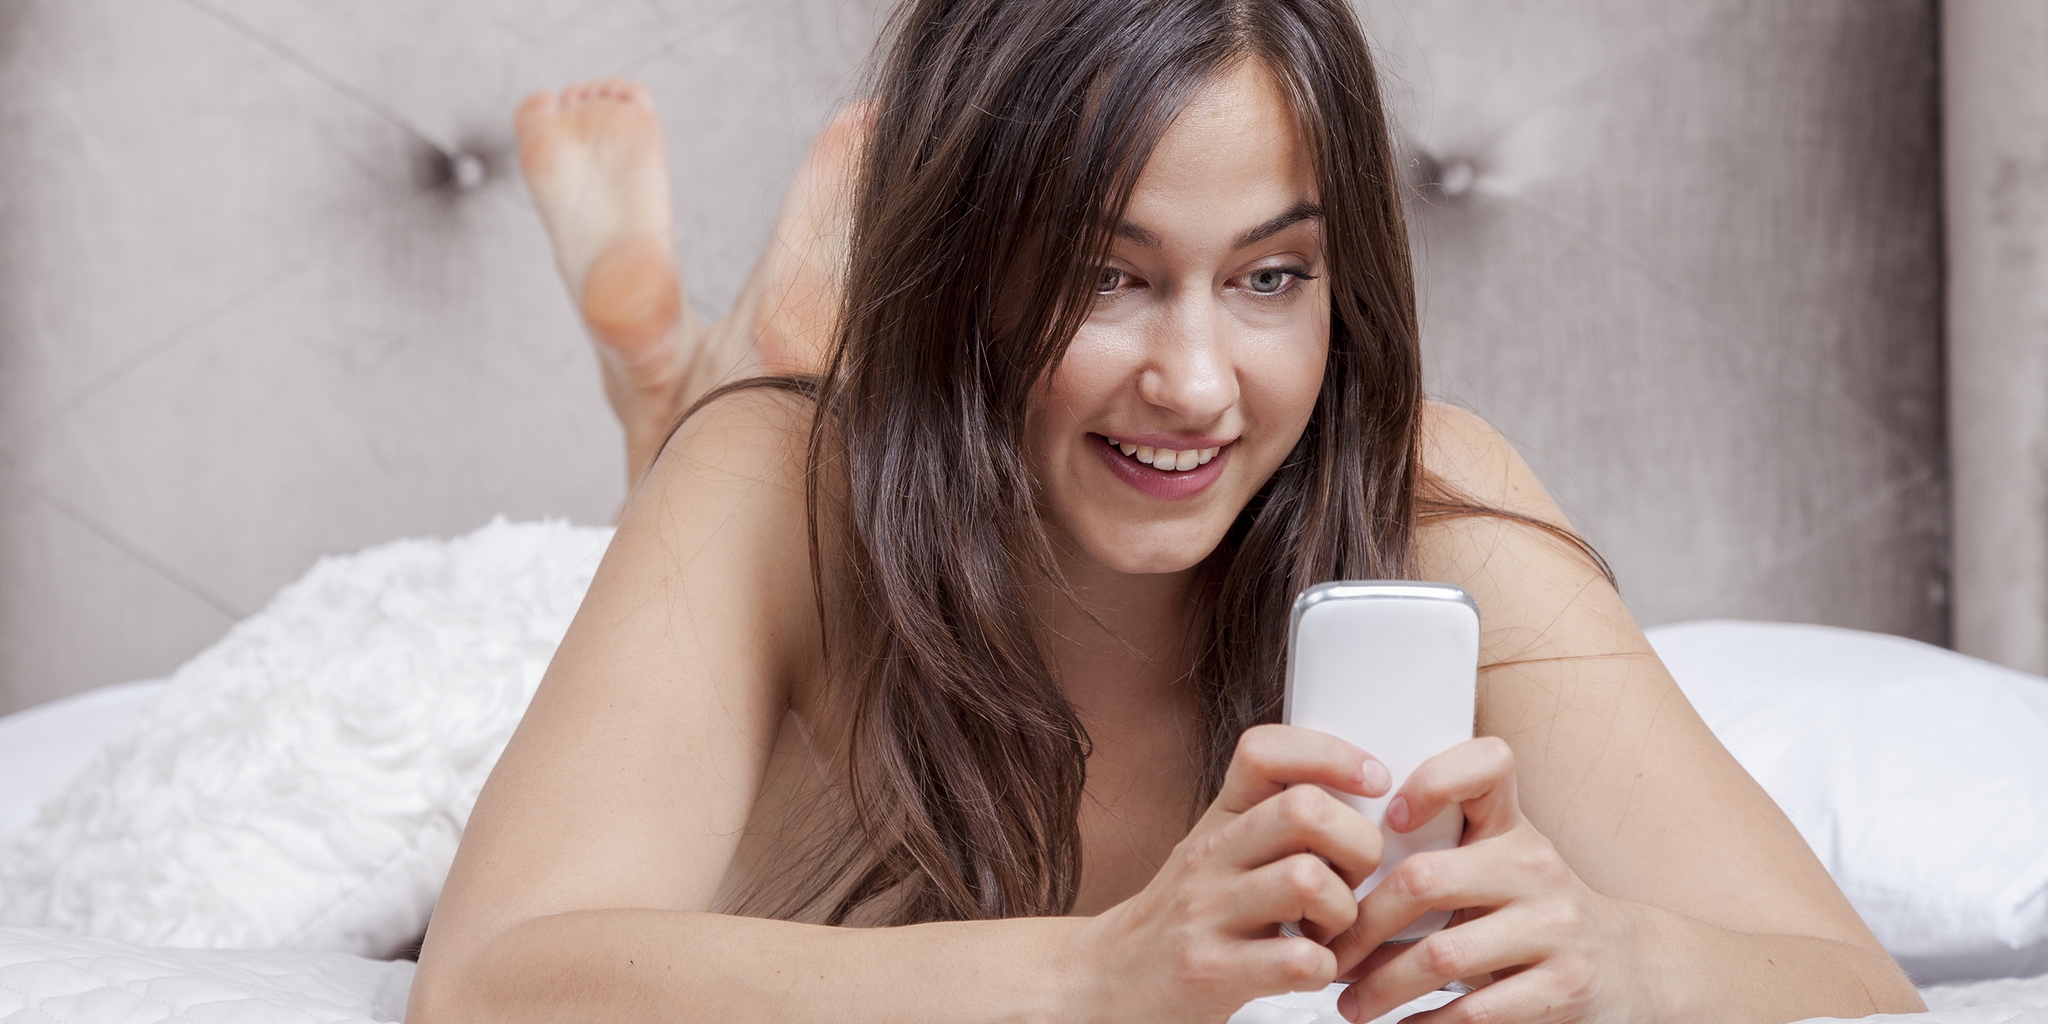 How to Watch Porn on Your Smartphone Without Catching a Virus photo